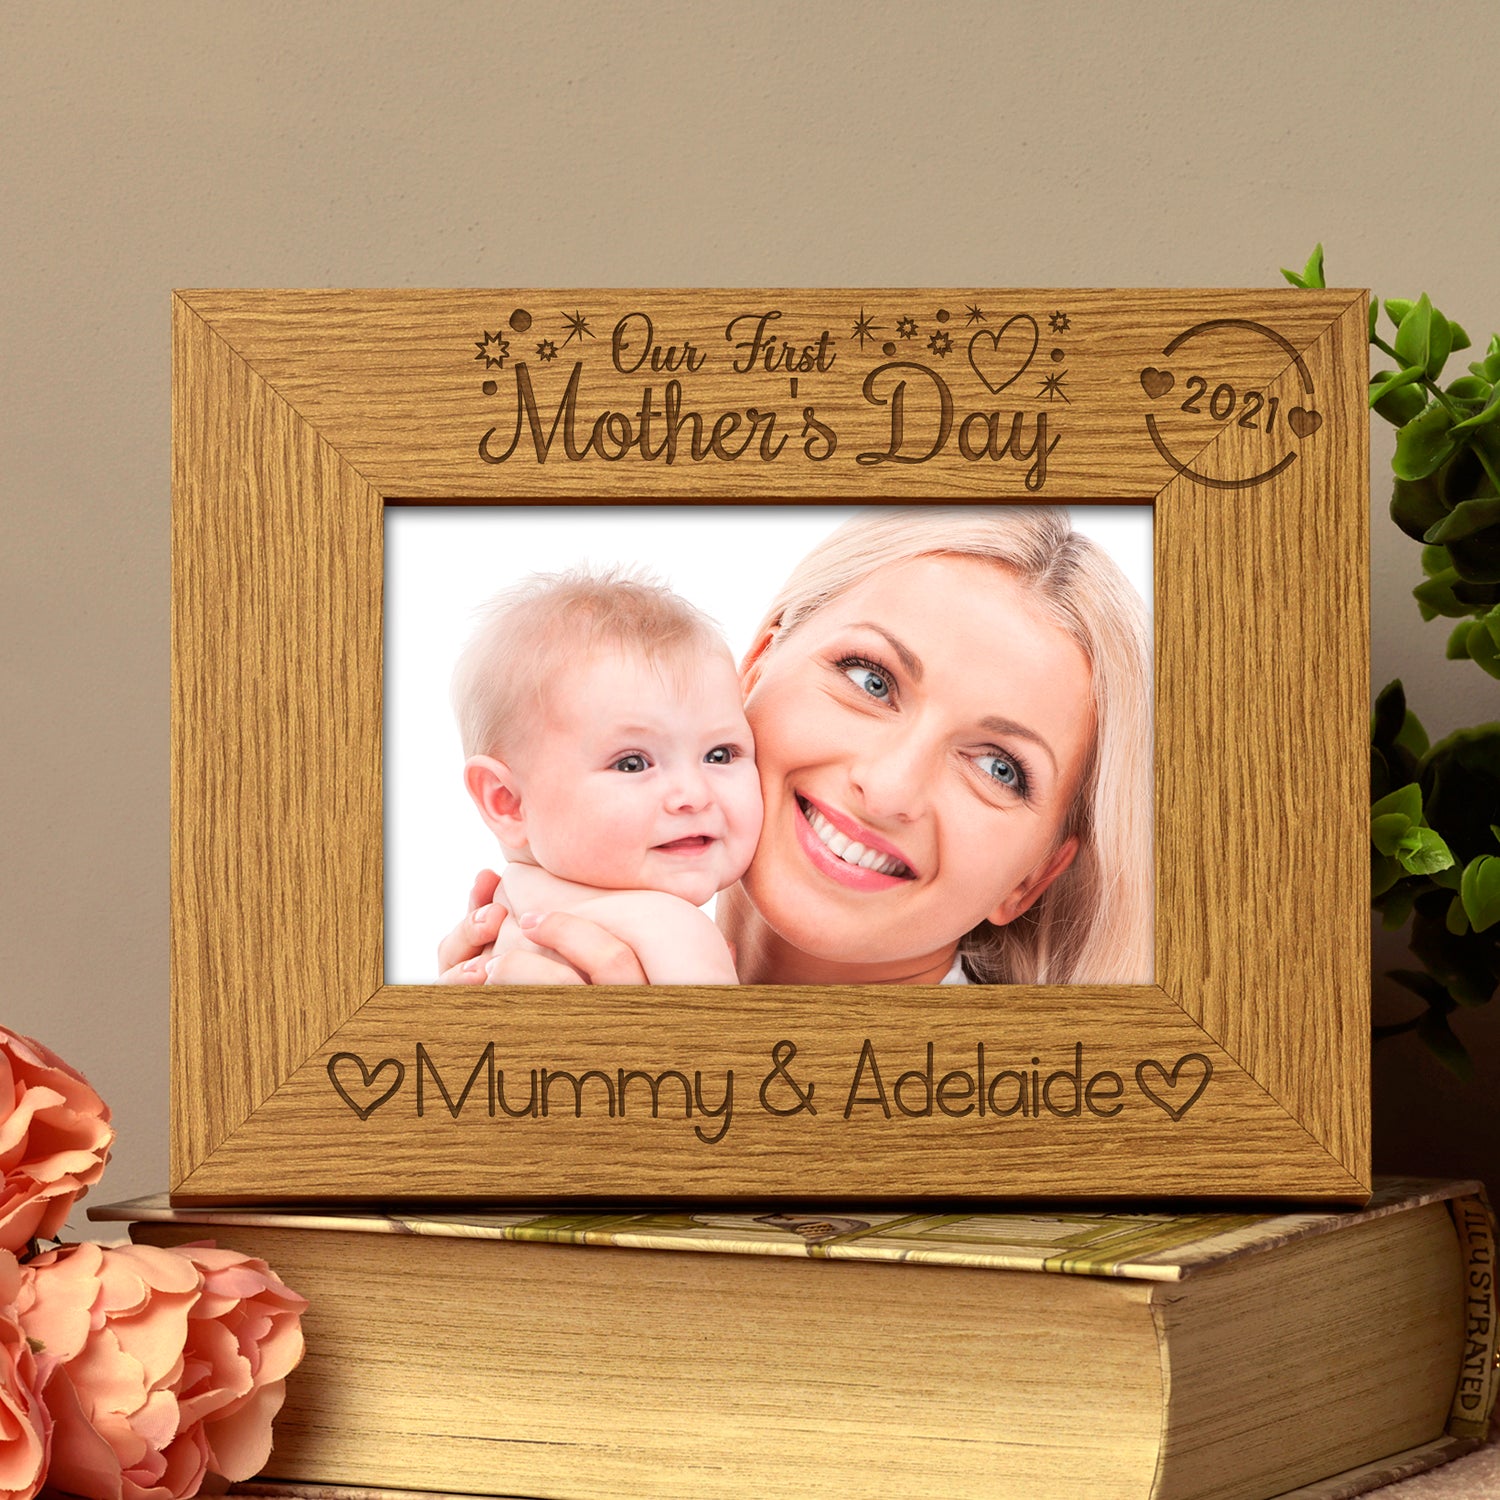 Personalised Our first Mothers Day Photo Frame Oak wood finish - ukgiftstoreonline